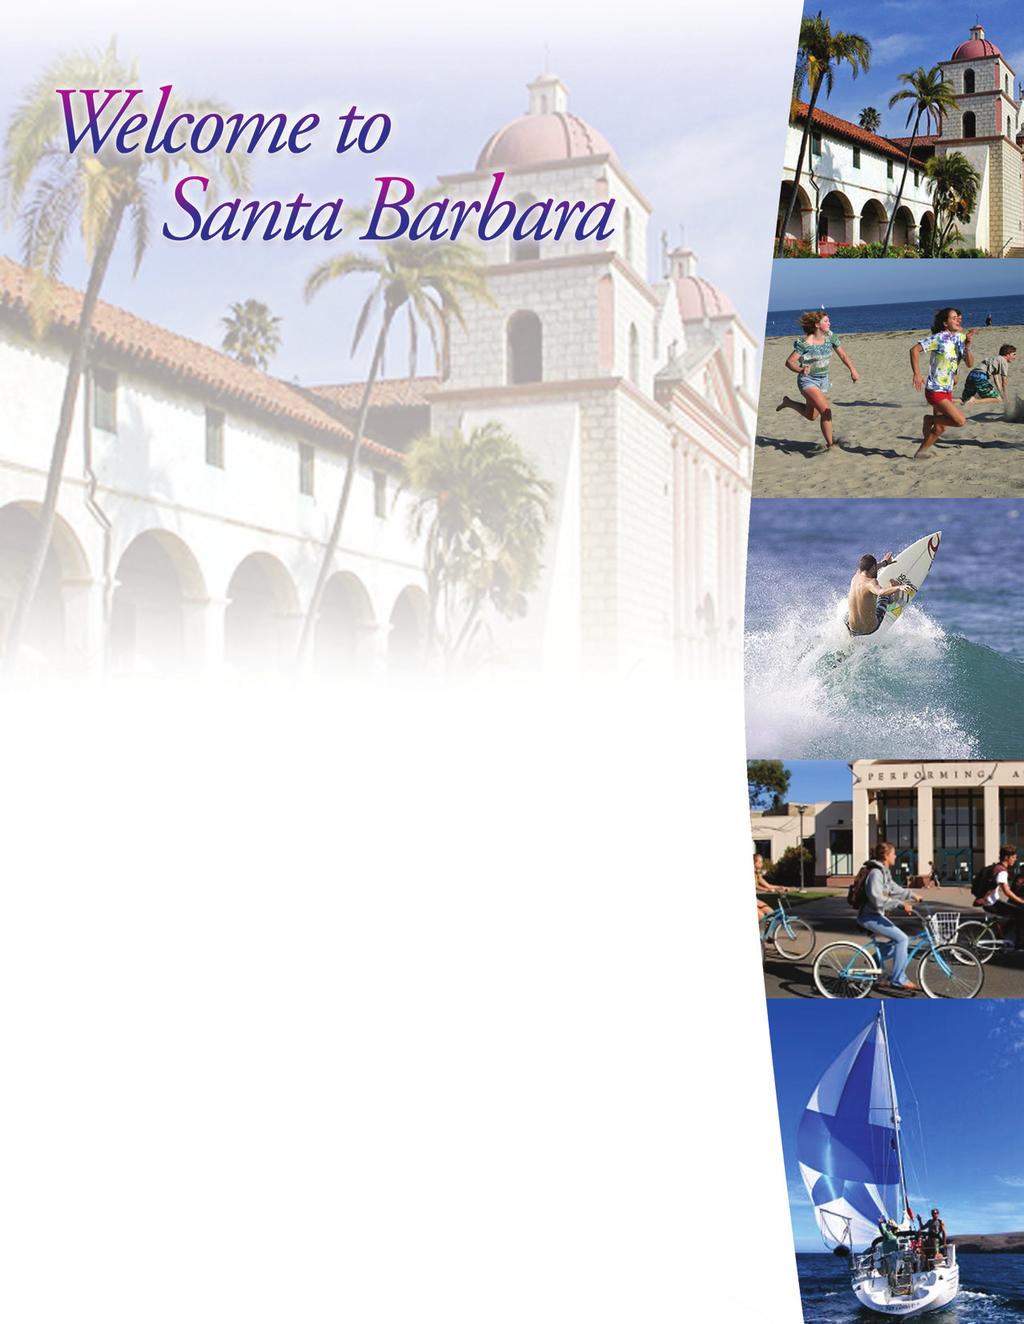 OUR TOWN Santa Barbara is a safe, comfortable, and vibrant city in a beautiful natural setting. annual festivals.